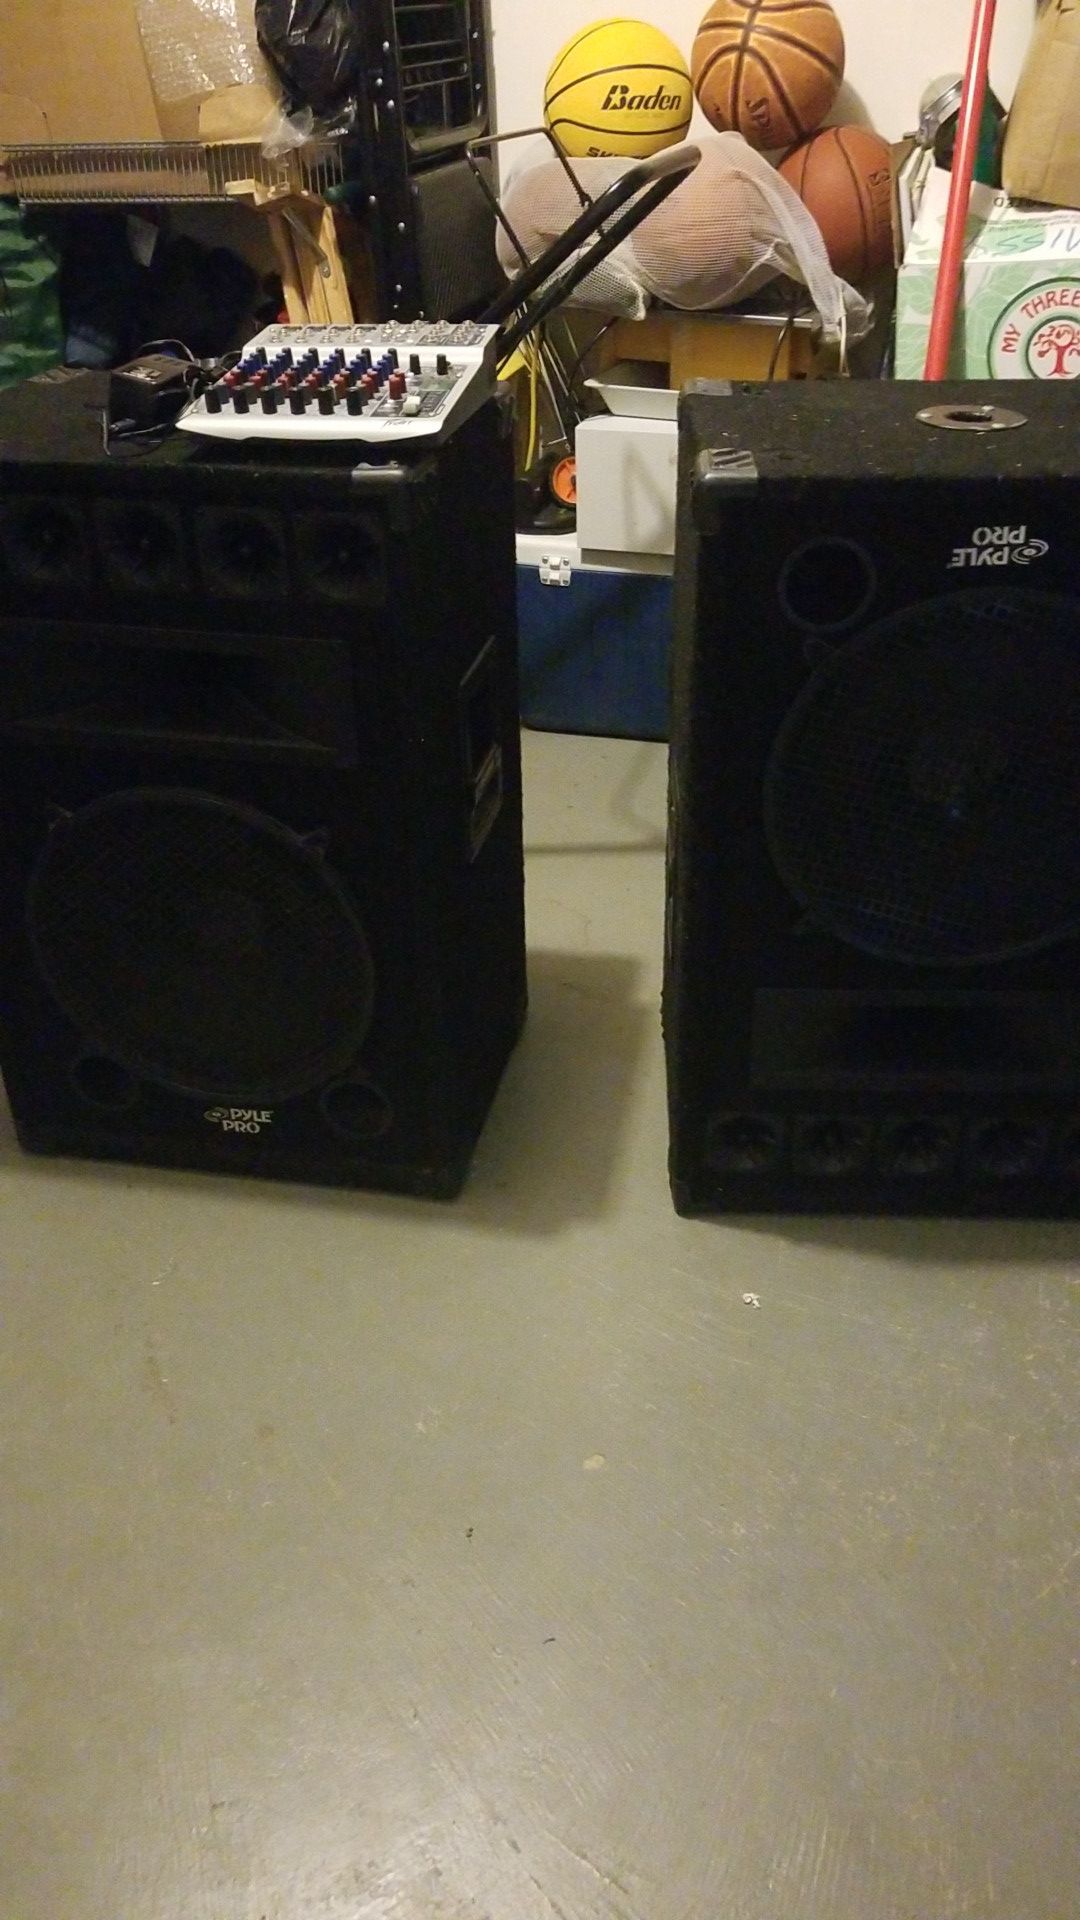 2 large speakers and mini sound board